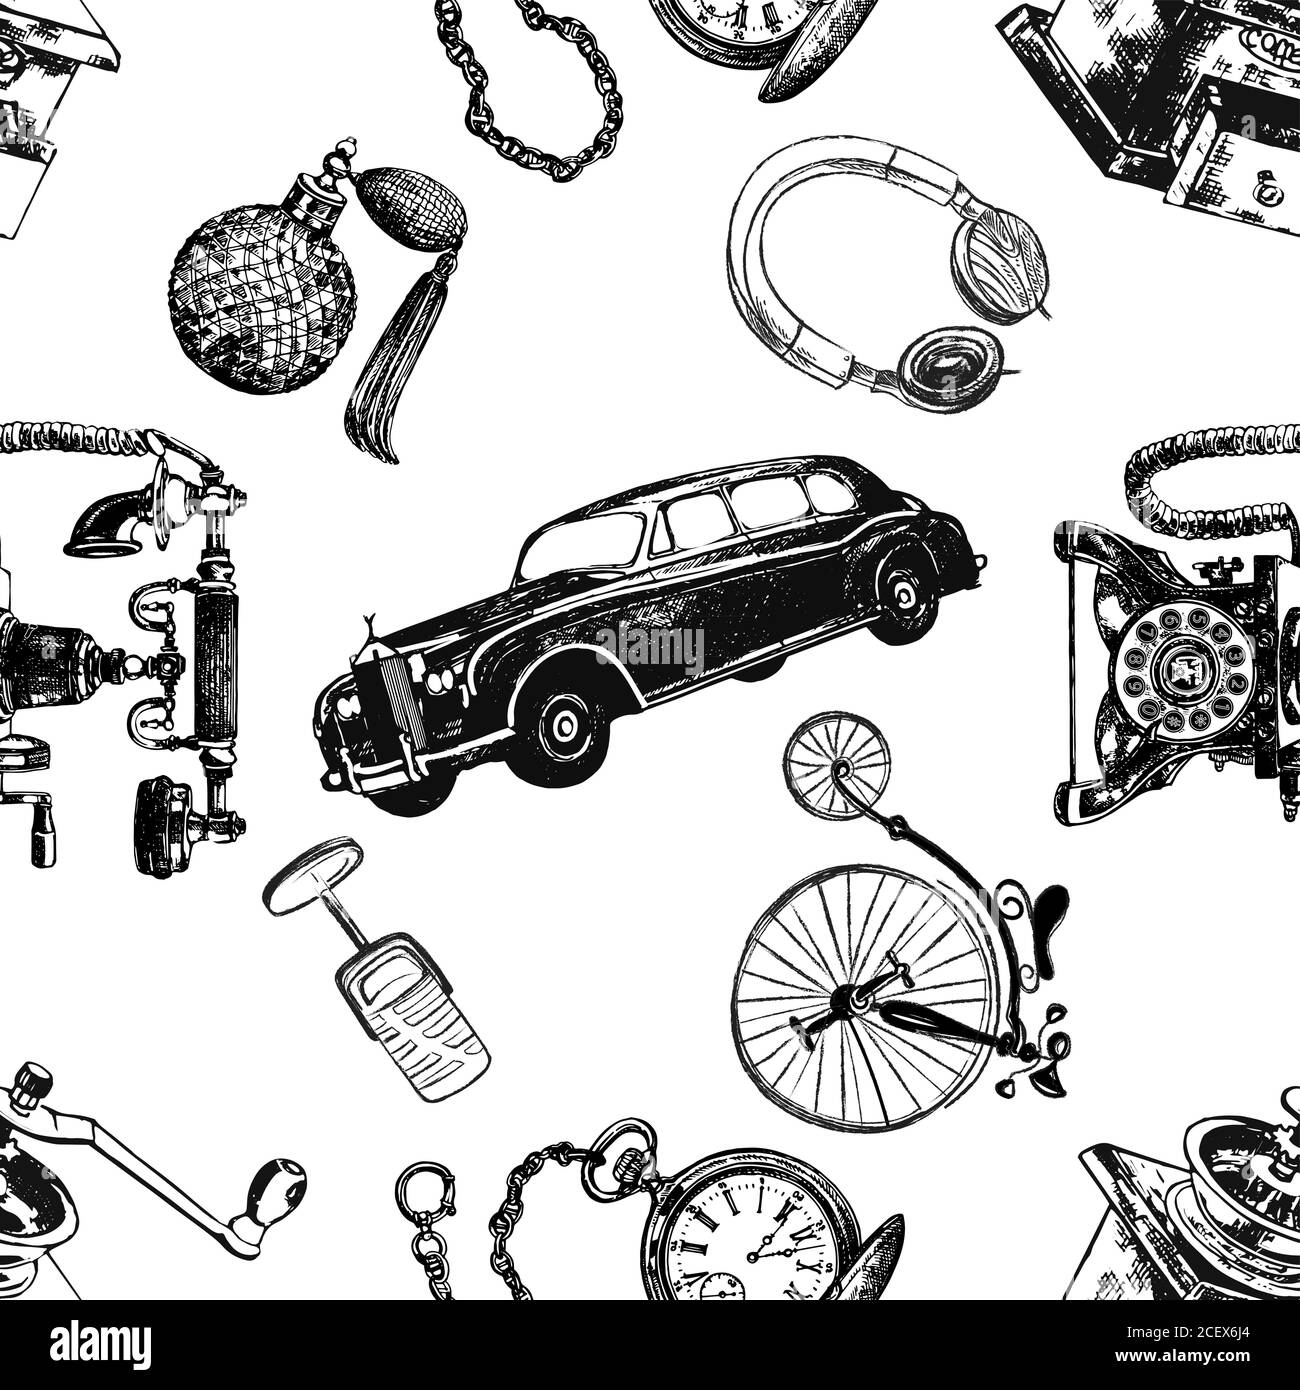 Seamless pattern of hand drawn sketch style different vintage objects isolated on white background. Vector illustration. Stock Vector